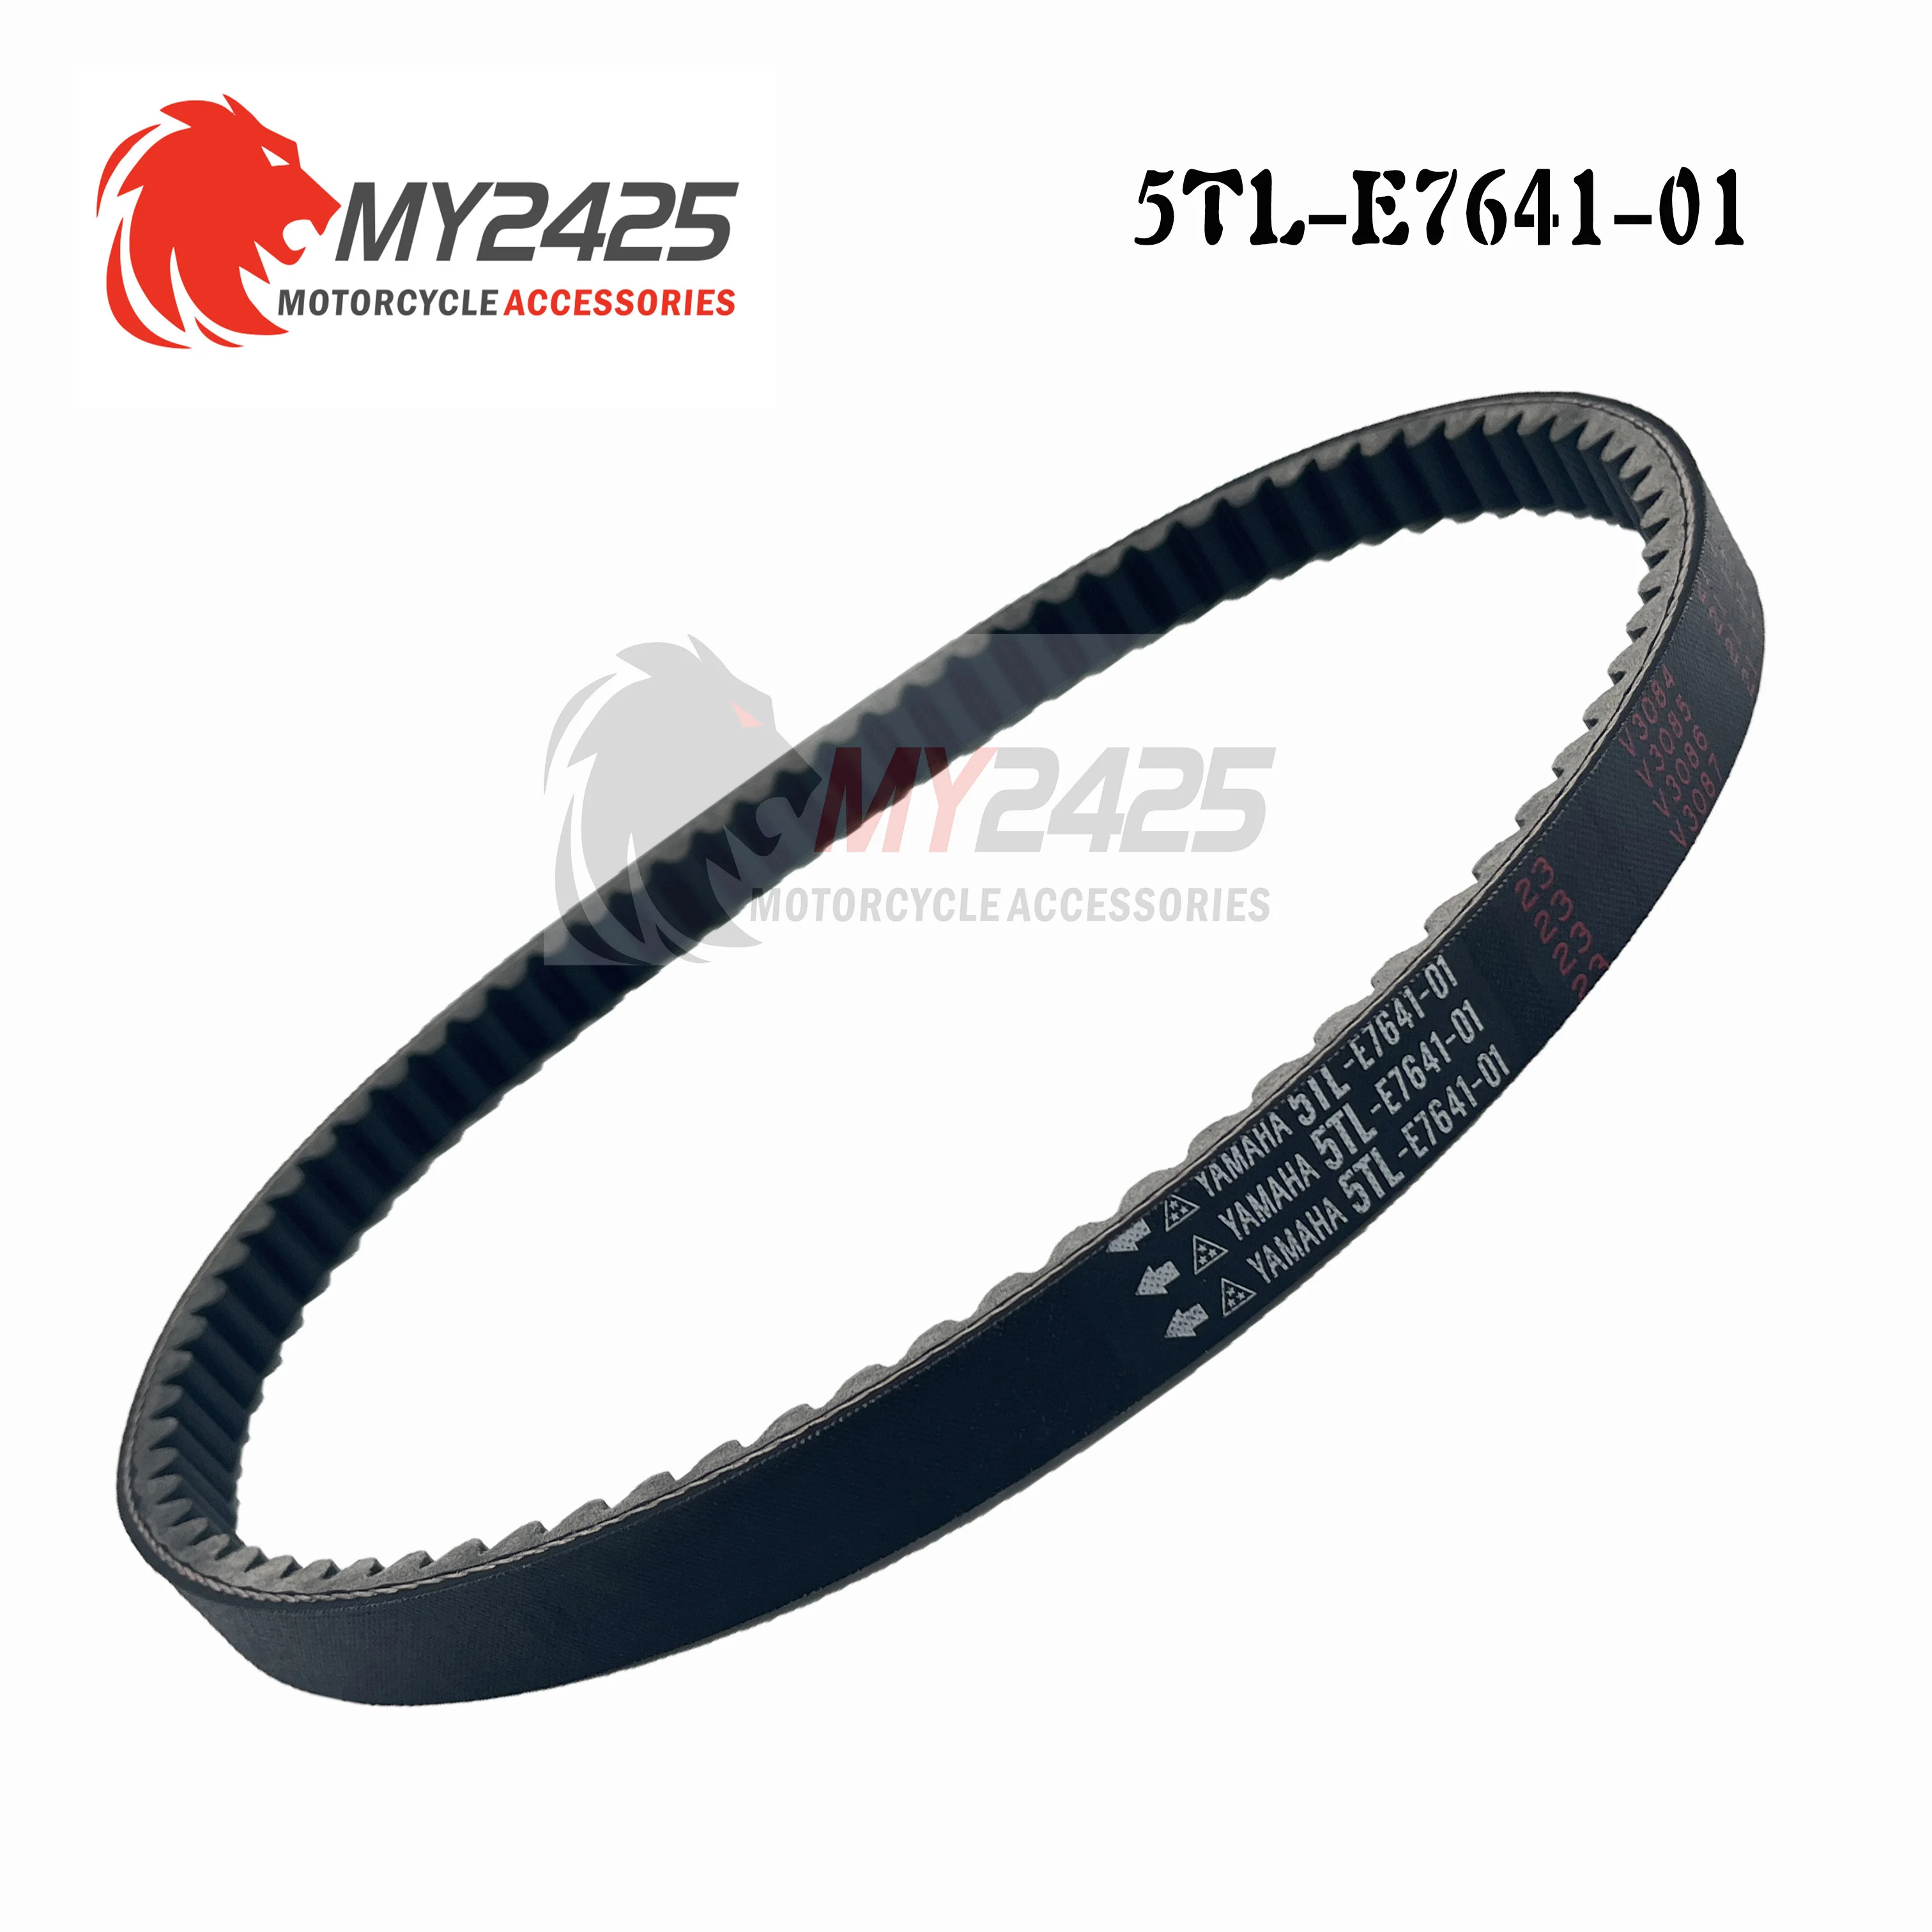 

5TL-E7641-01 Motorcycle Scooter Moped High Quality Rubber Drive Belt for Mio115 Mio 110 sporty amore5TL E7641 01 Maoyubelt